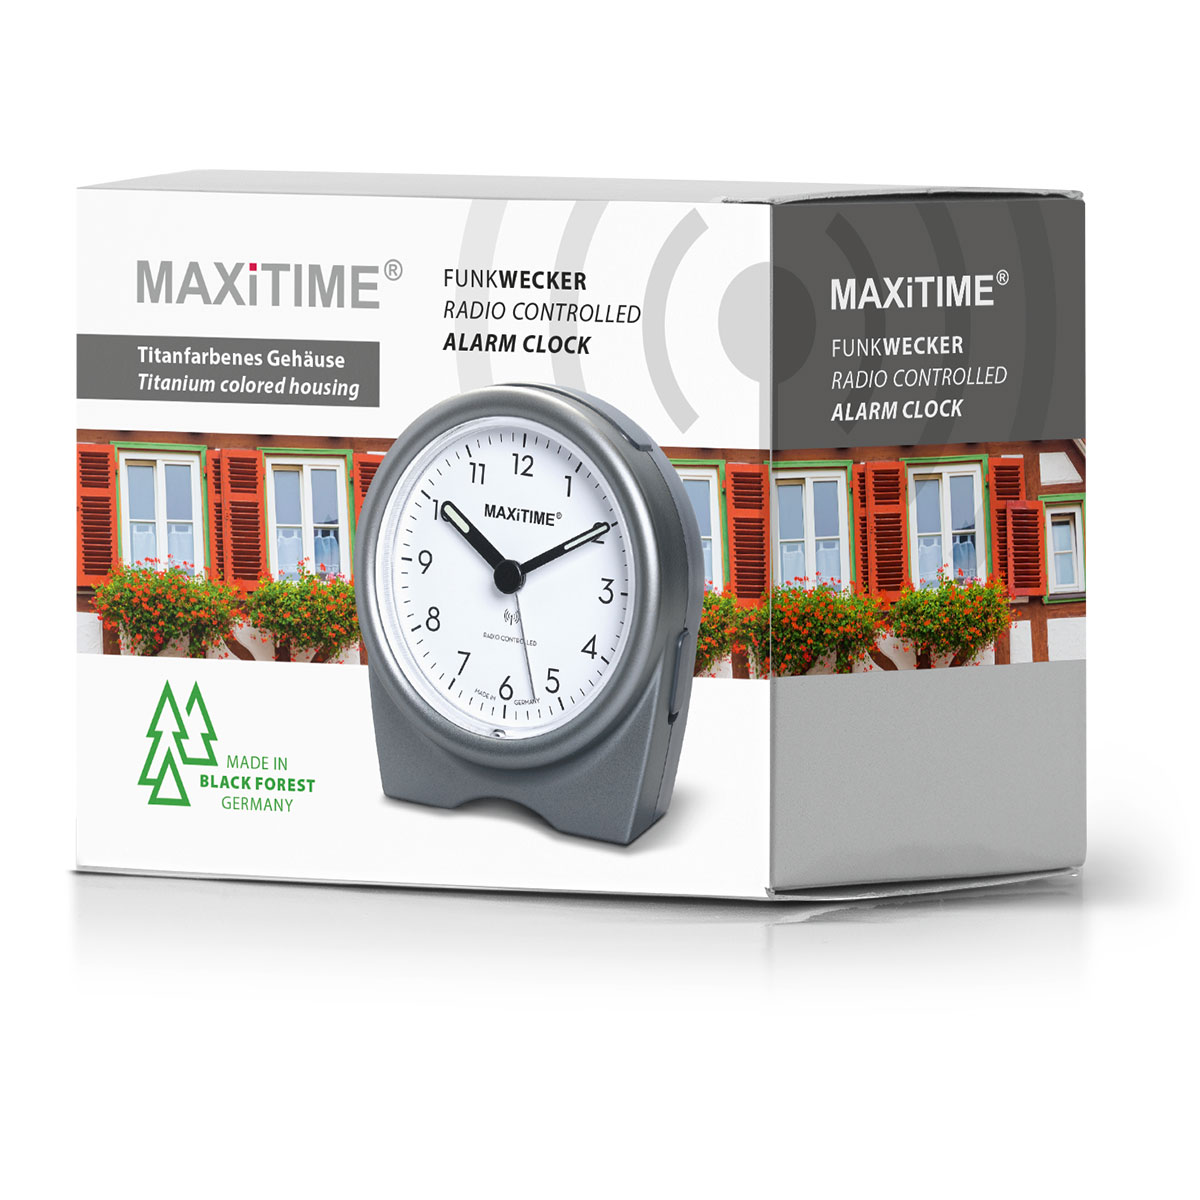 Maxitime radio controlled alarm clock with snooze, crescendo alarm, light, 2 hands, titan housing with stand